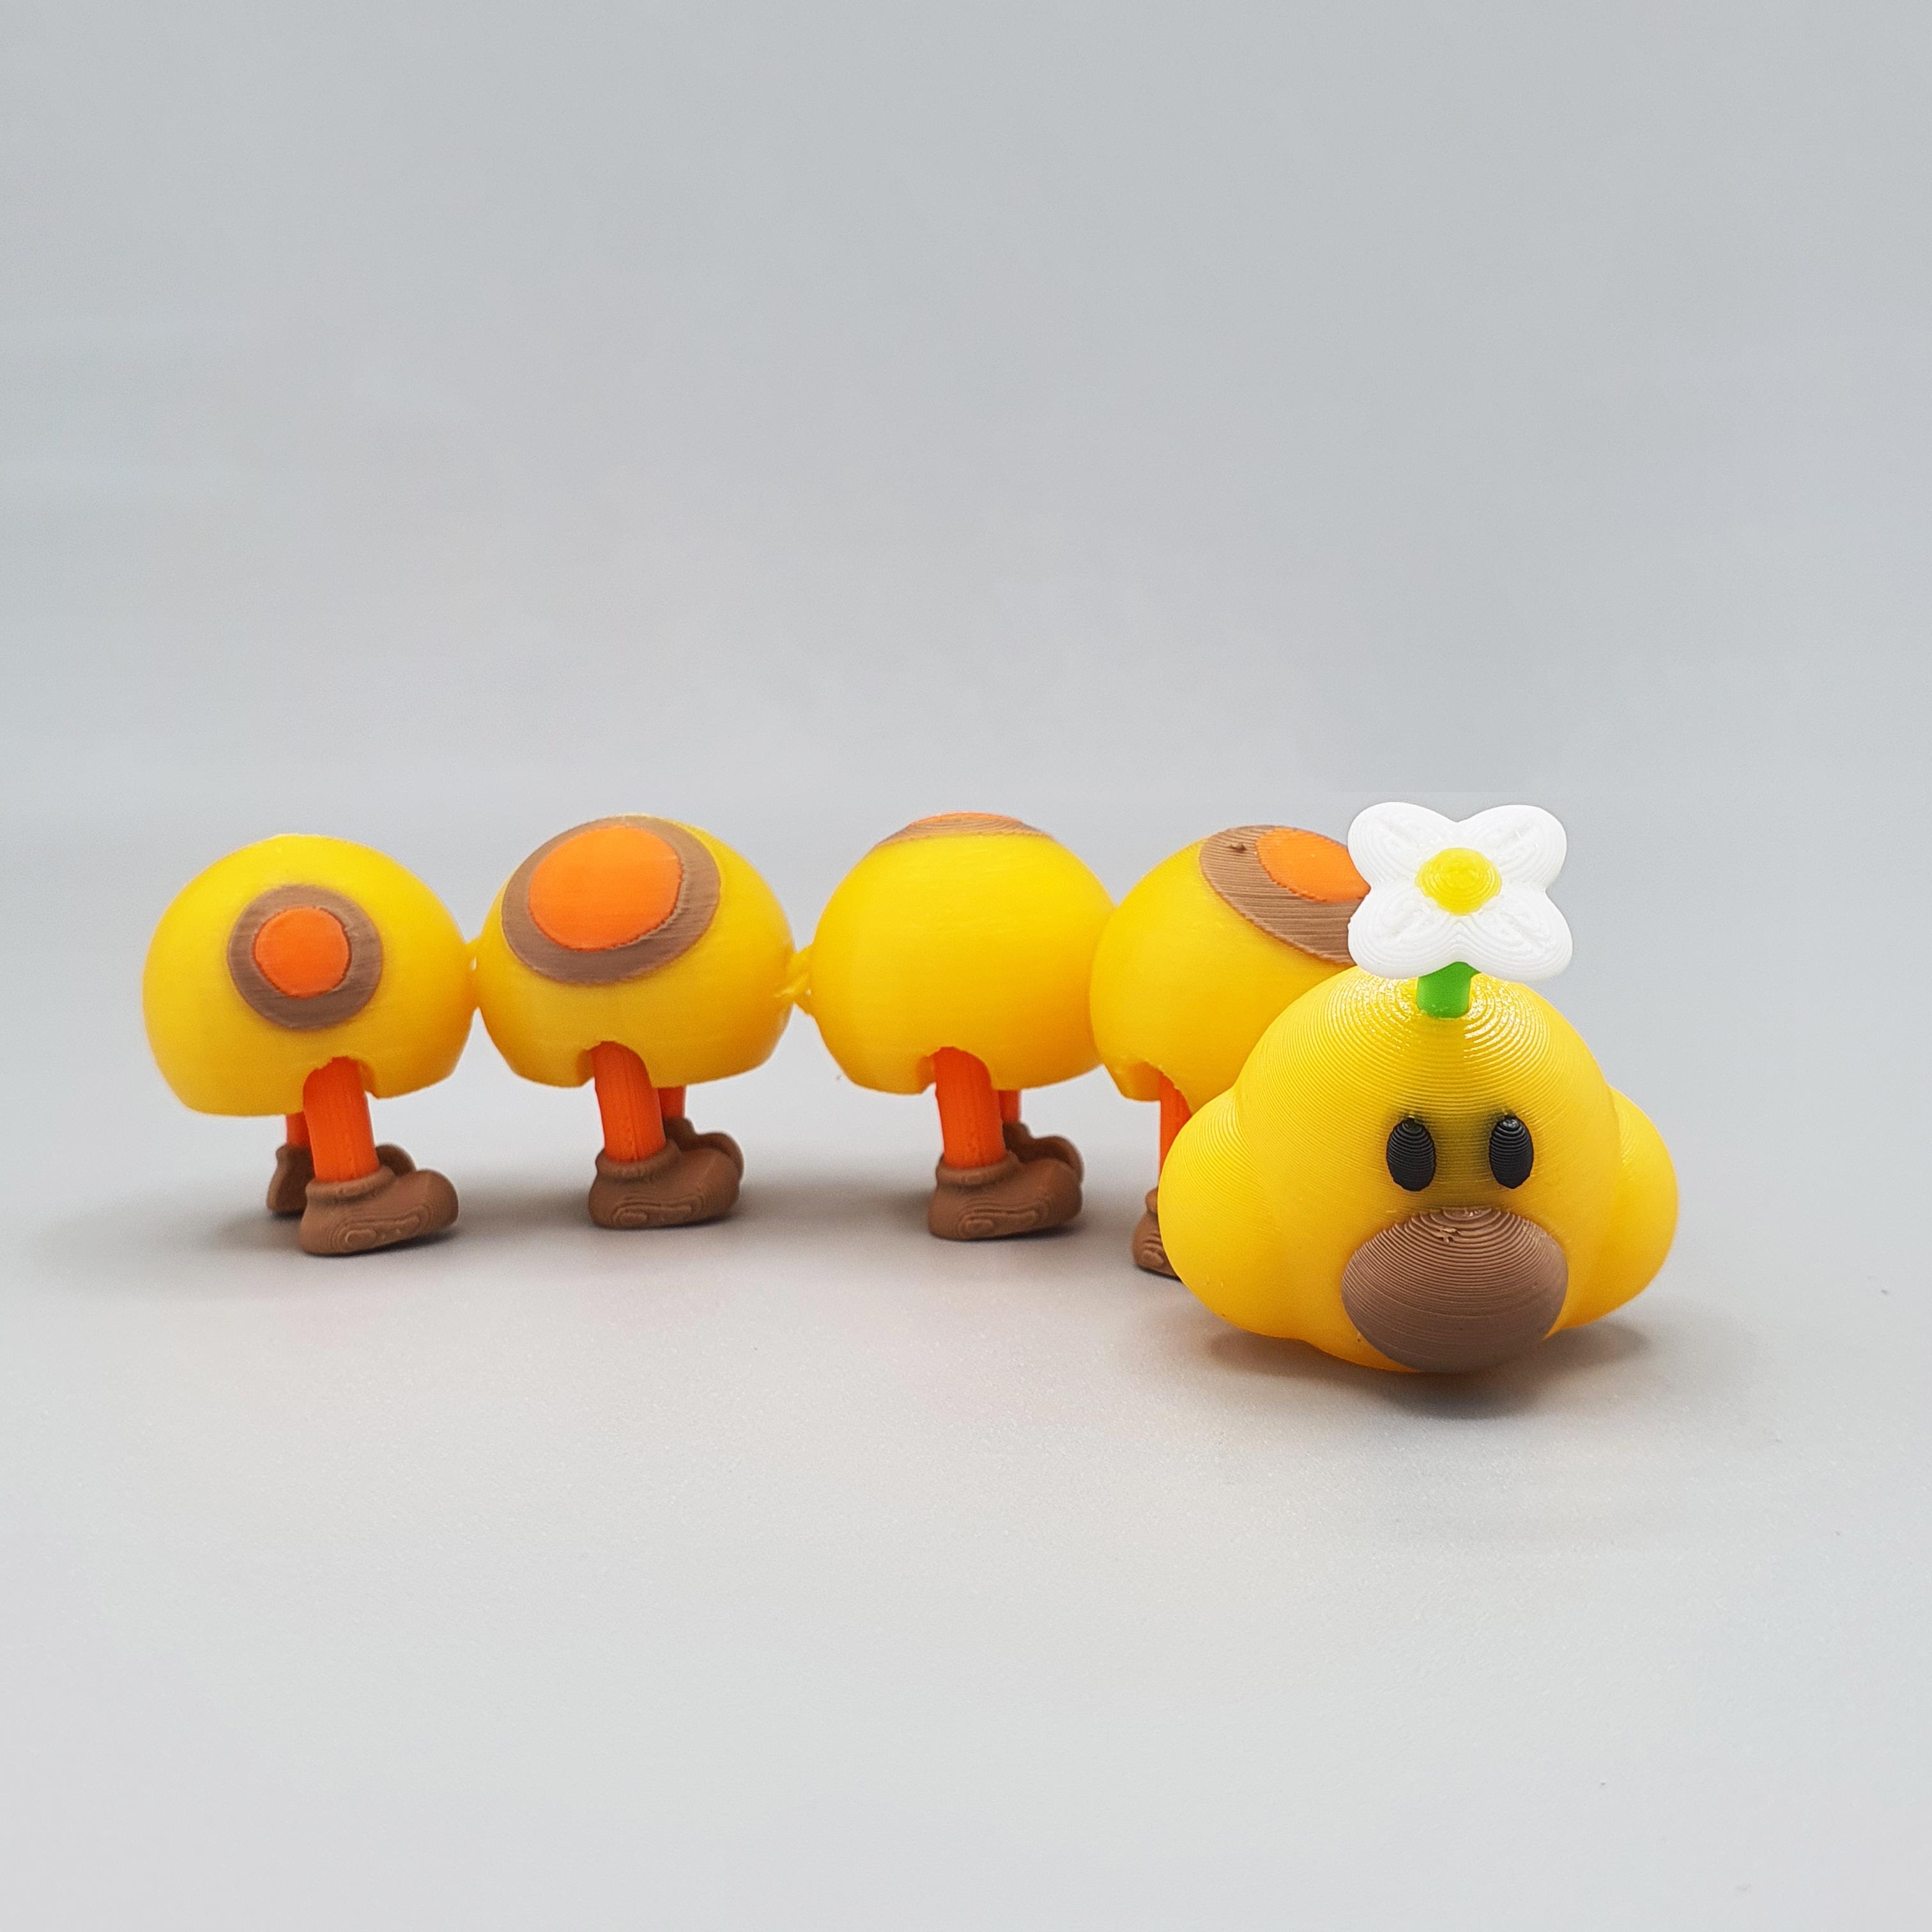 Wiggler Caterpillar from Super Mario Print in Place 3d model